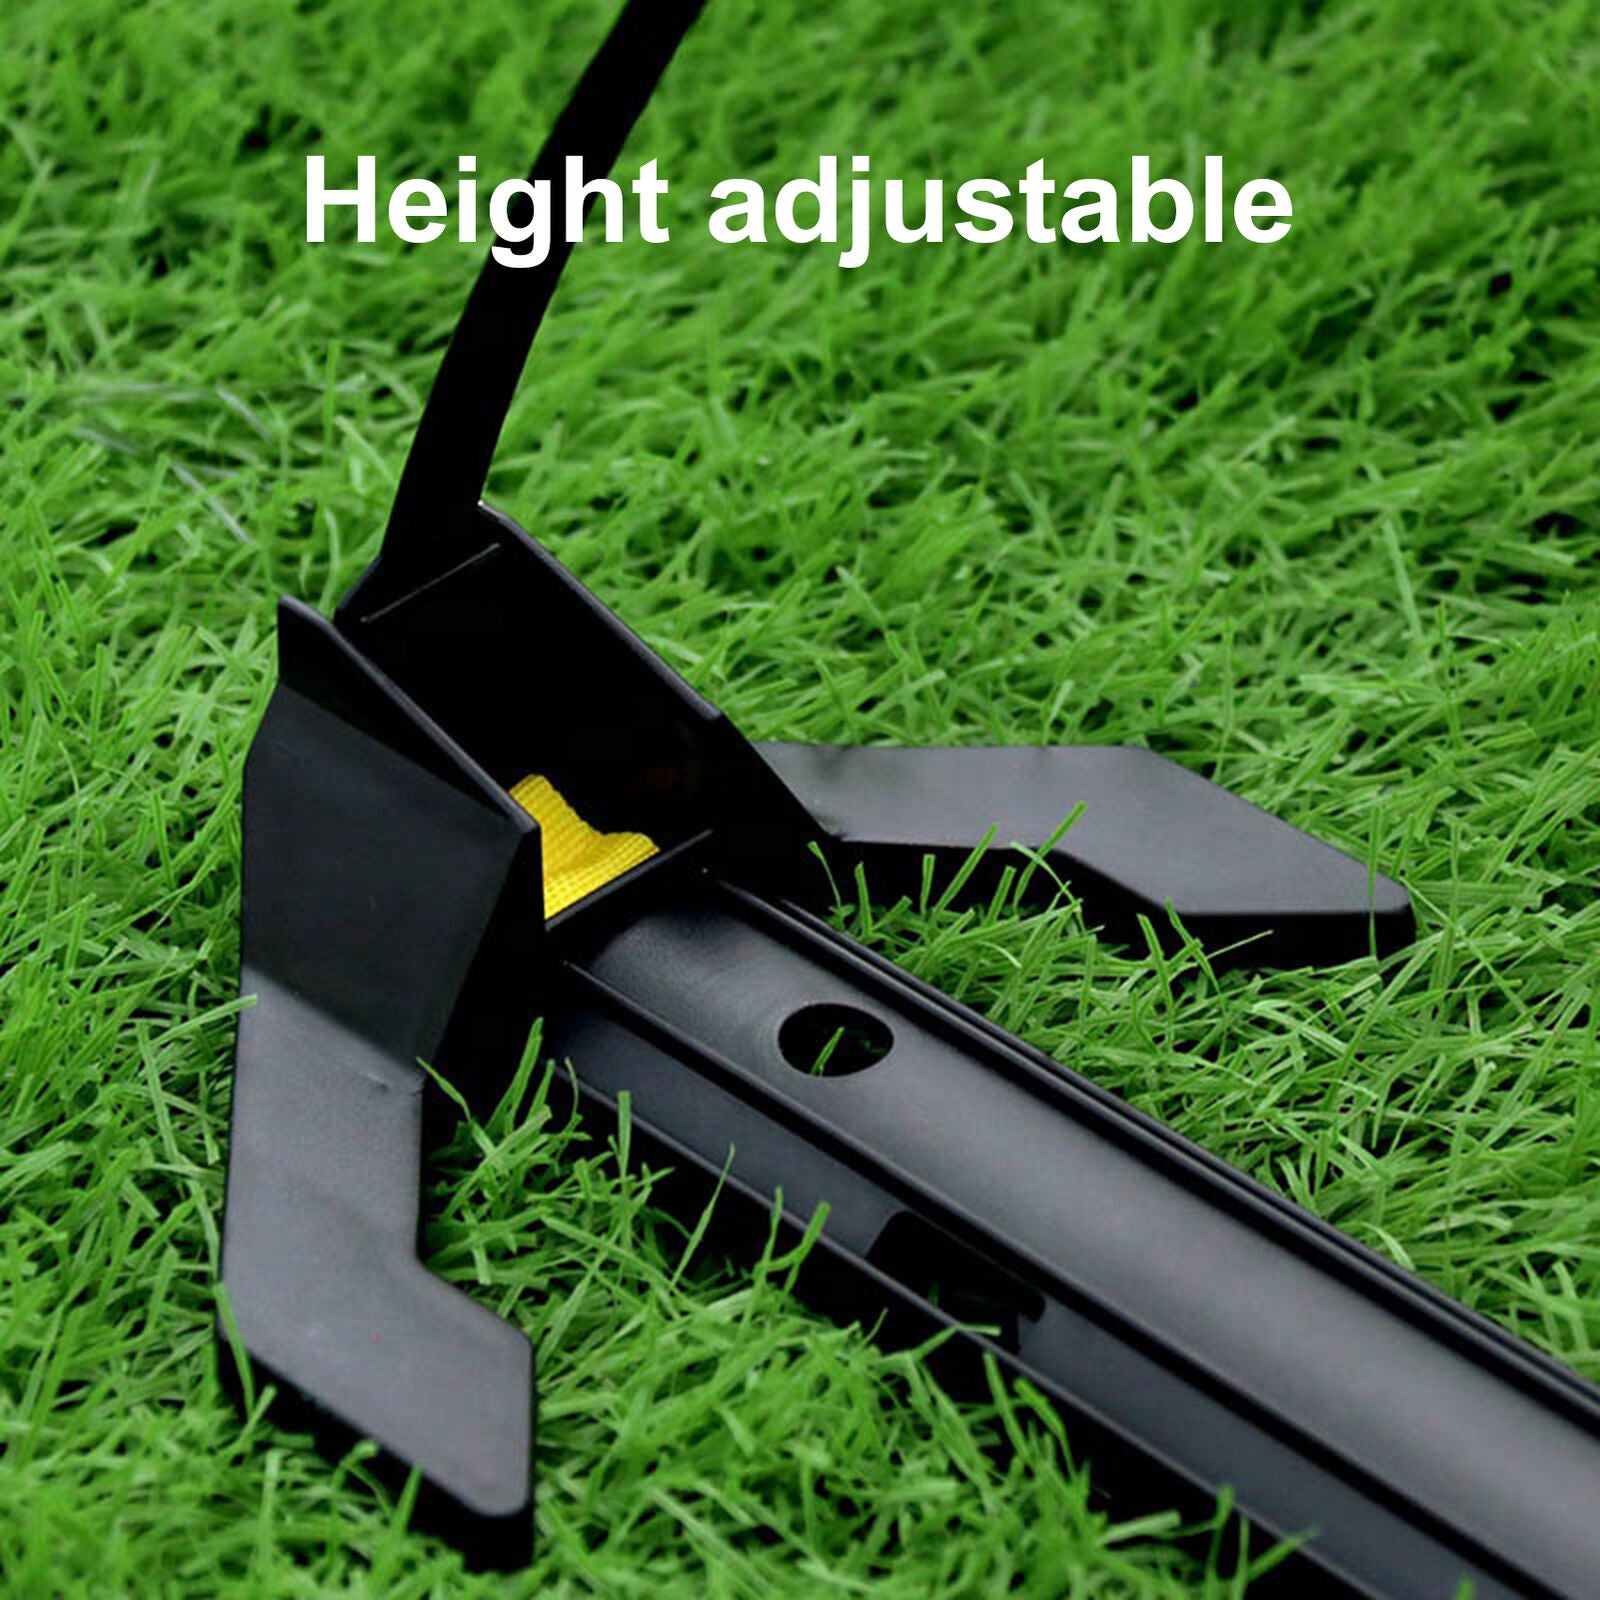 Soccer Agility Hurdle Elastic Adjustable Convenient Sturdy for Outdoor